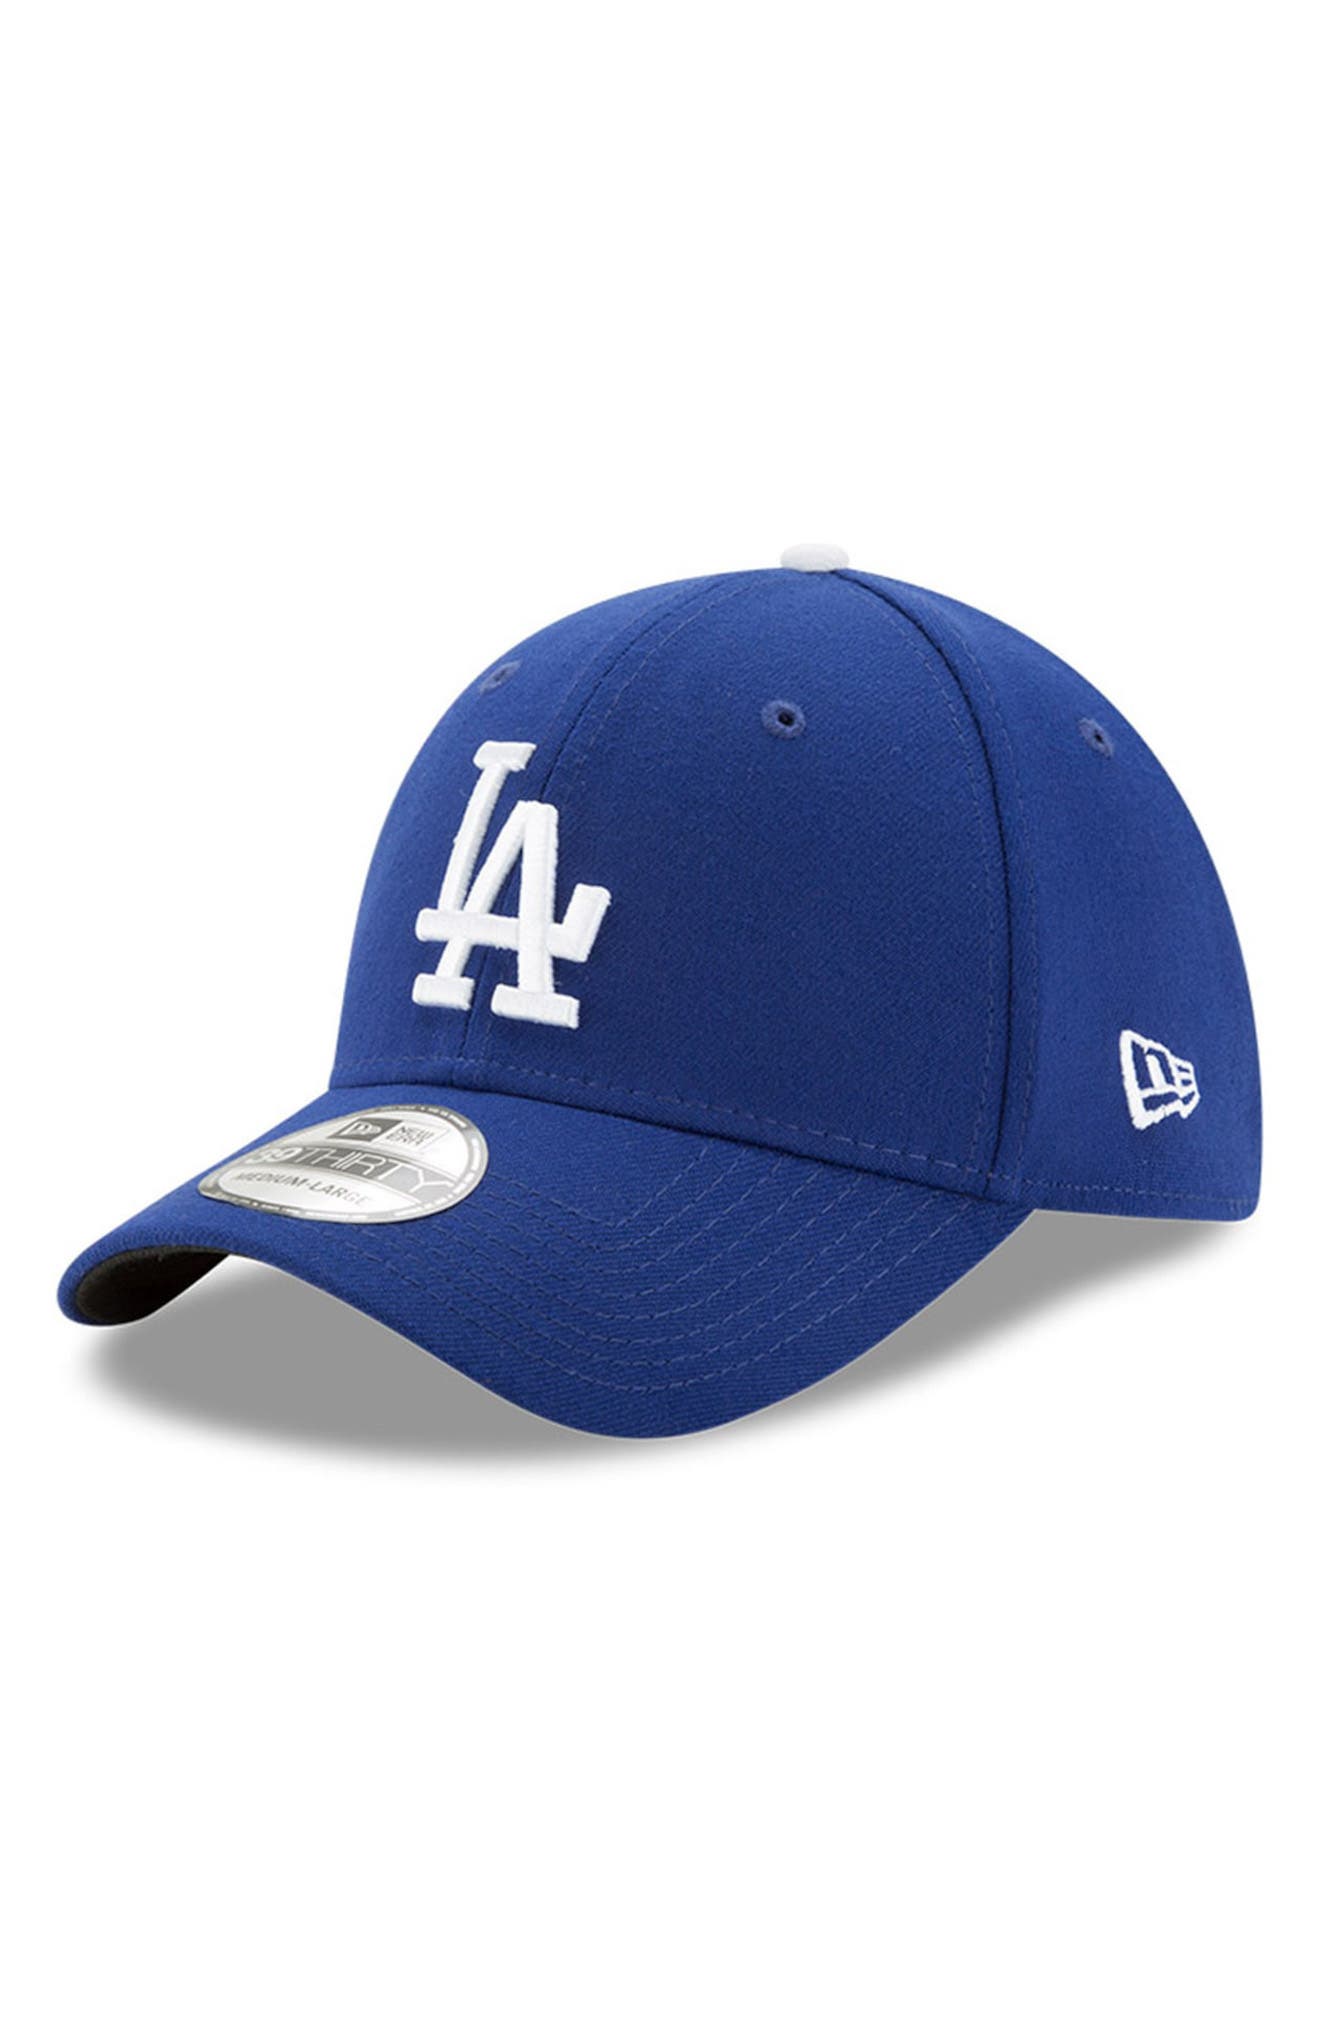 Los Angeles Dodgers Royal 2020 World Series Champions Sidepatch 39THIRTY Flex Hats